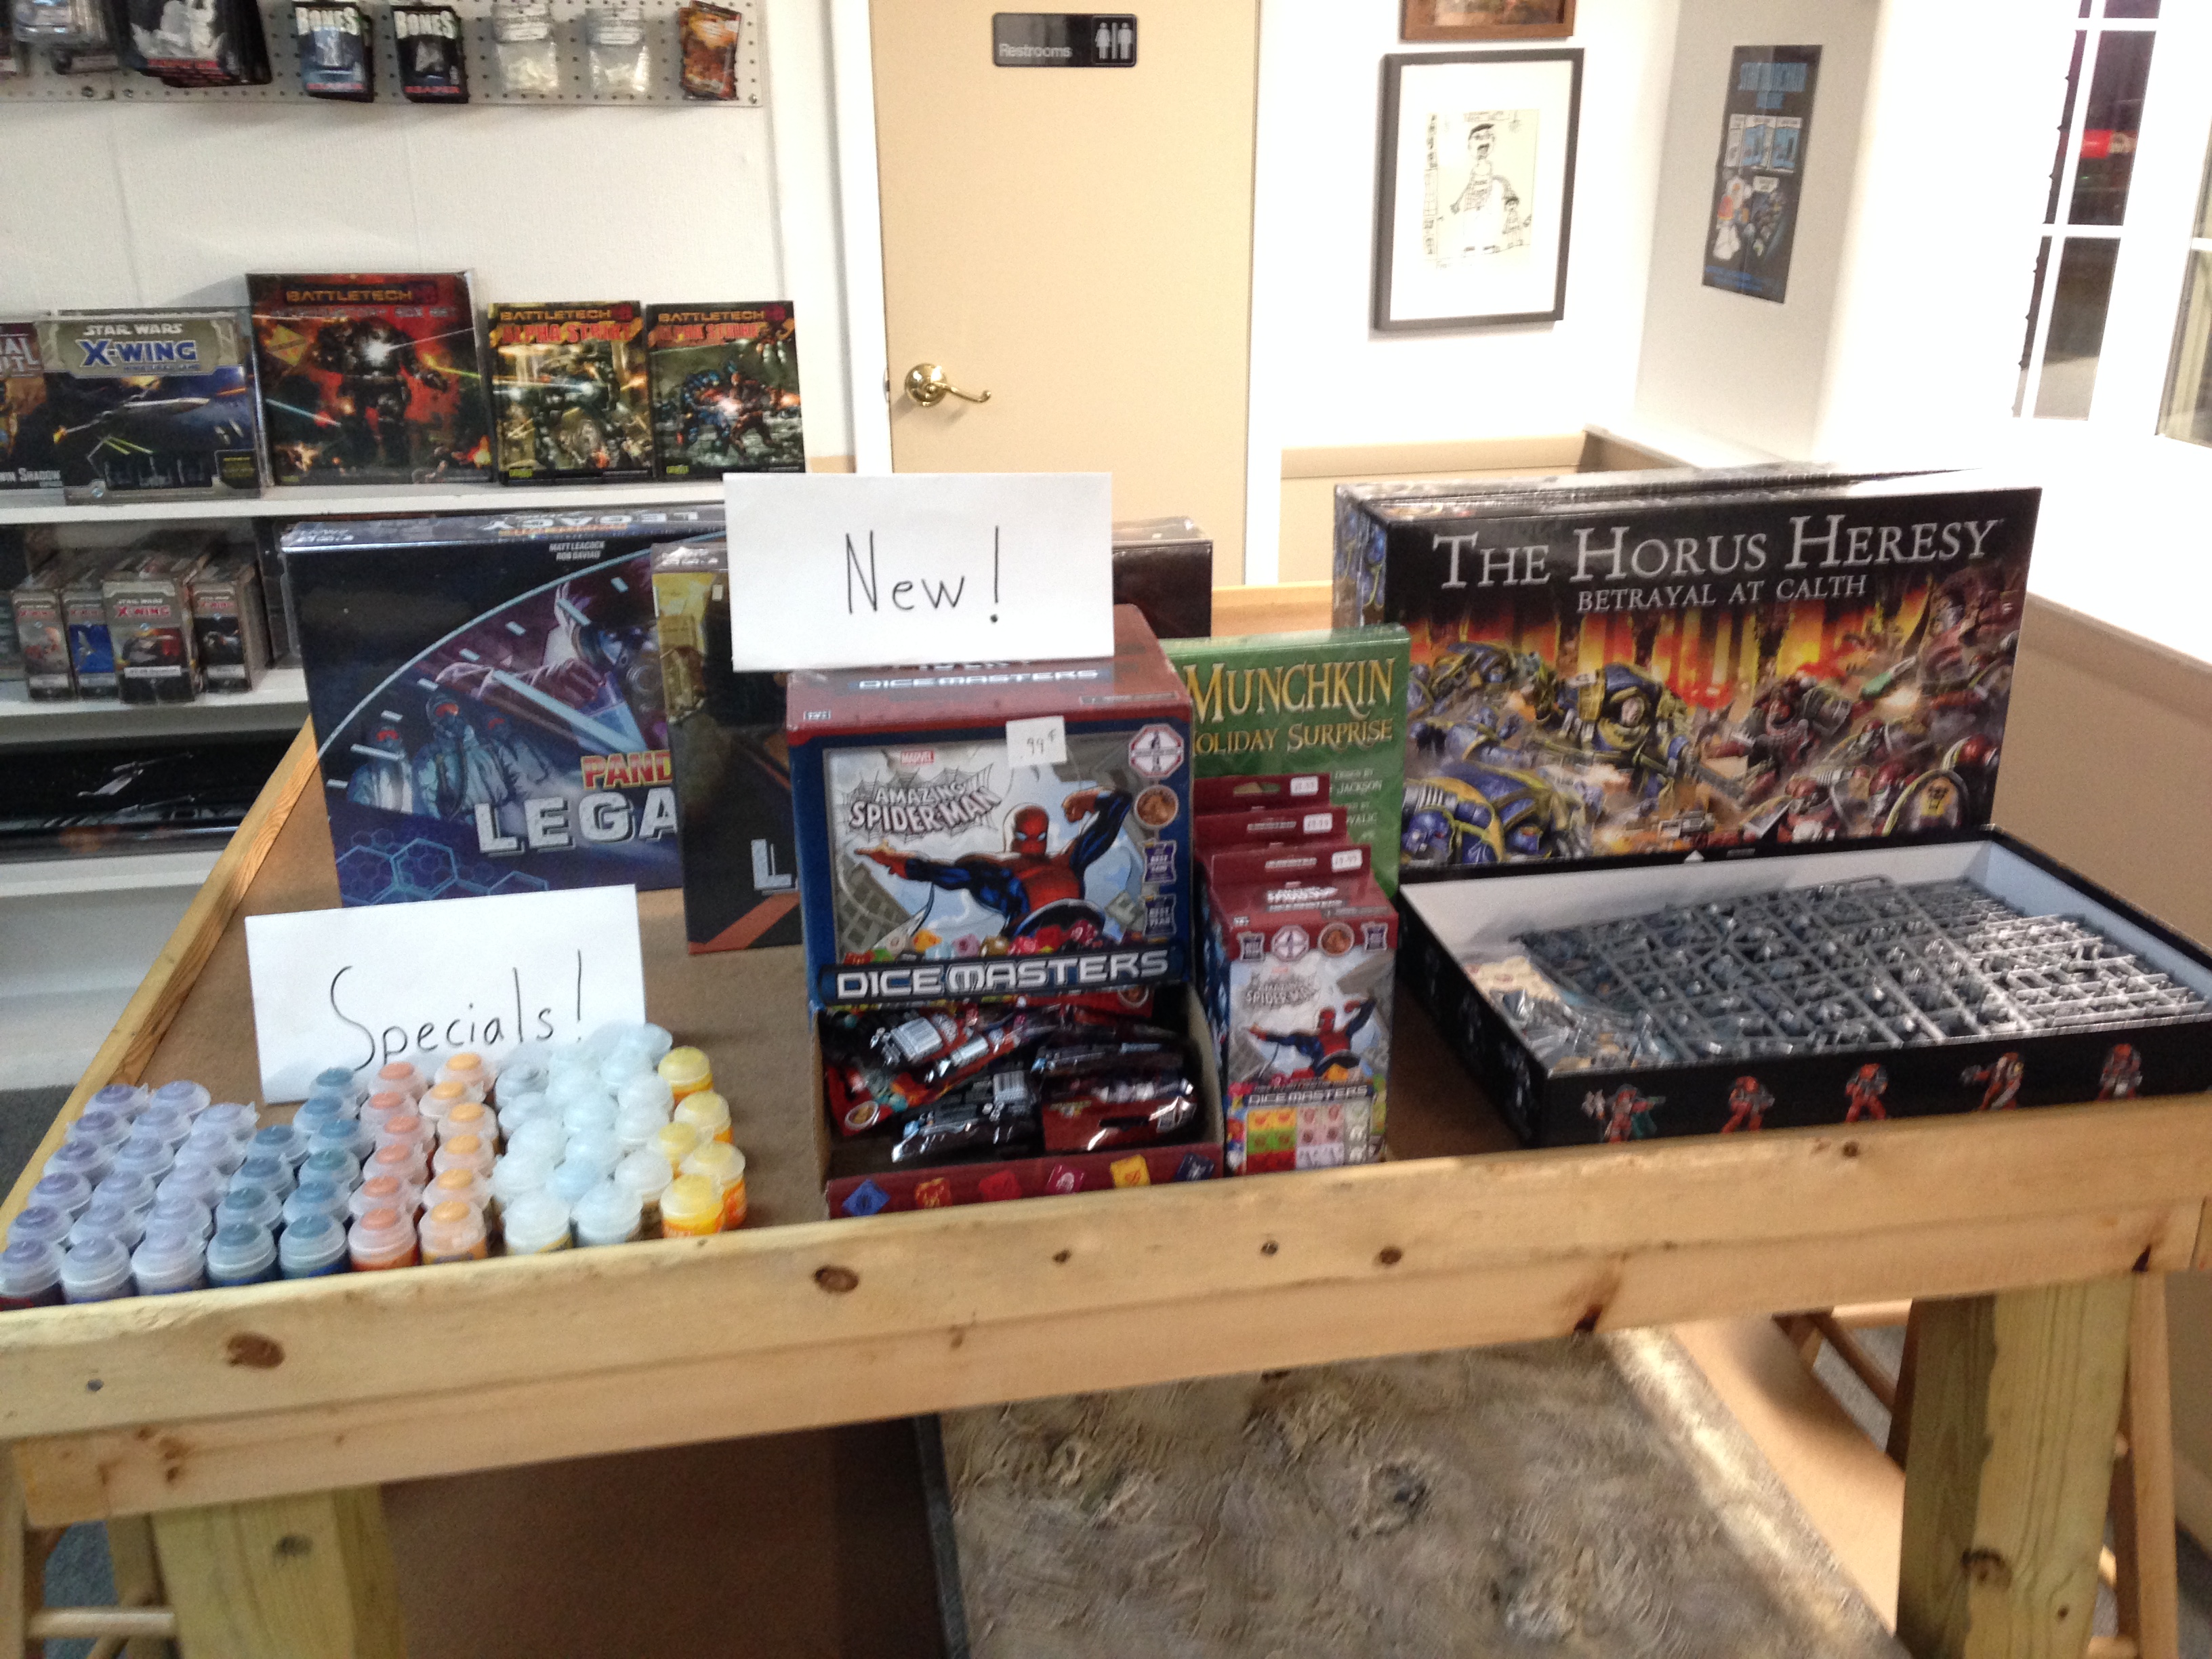 New in the Store 11/20/15 Dice Masters: The Amazing Spider-Man